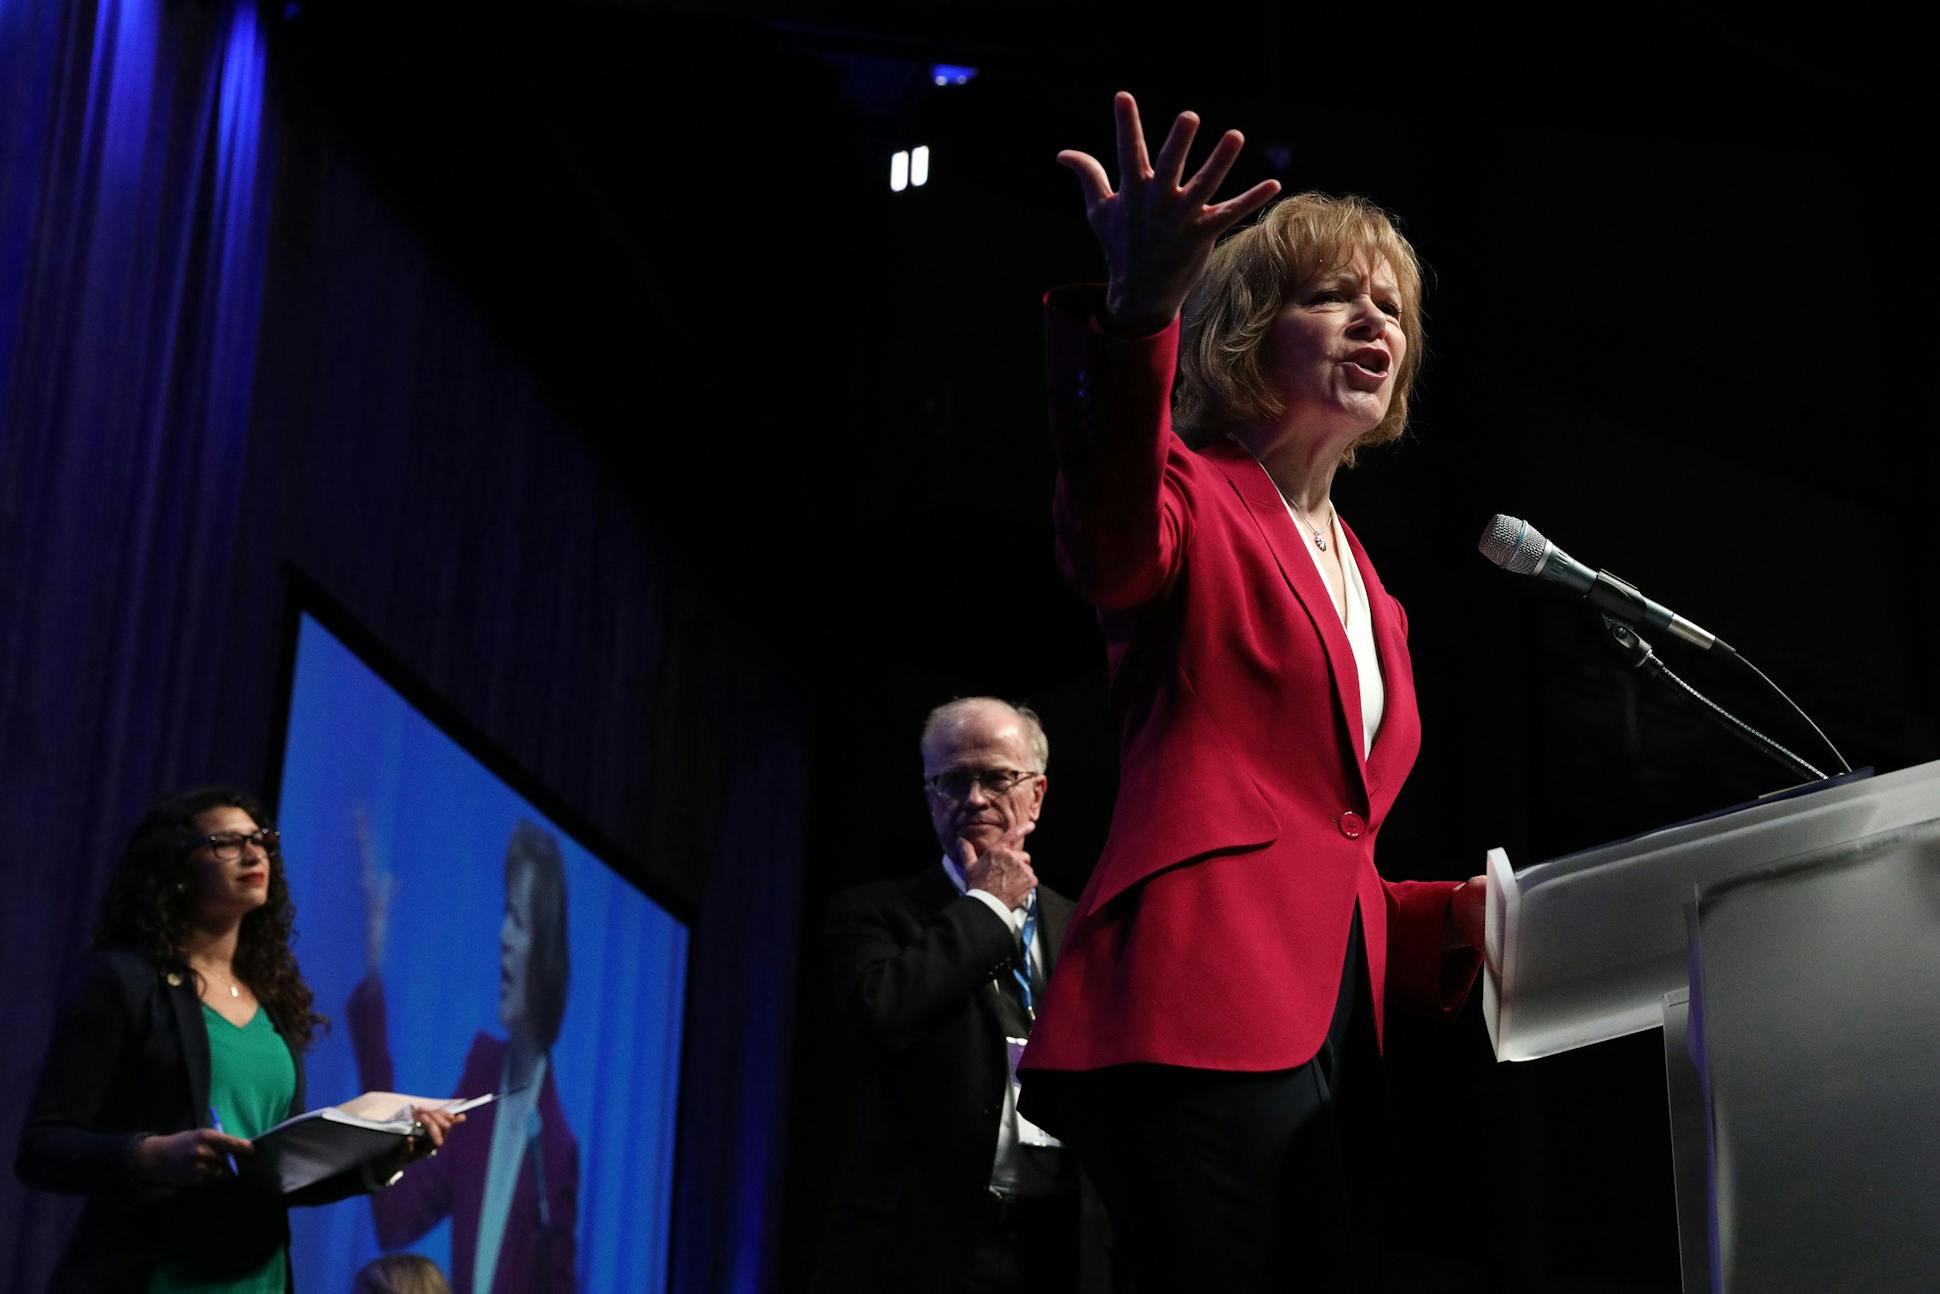 U.S. Sen. Tina Smith spoke from the stage during the DFL State Convention to choose the party's nominees in June at the Mayo Civic Center in Rochester, Minn.